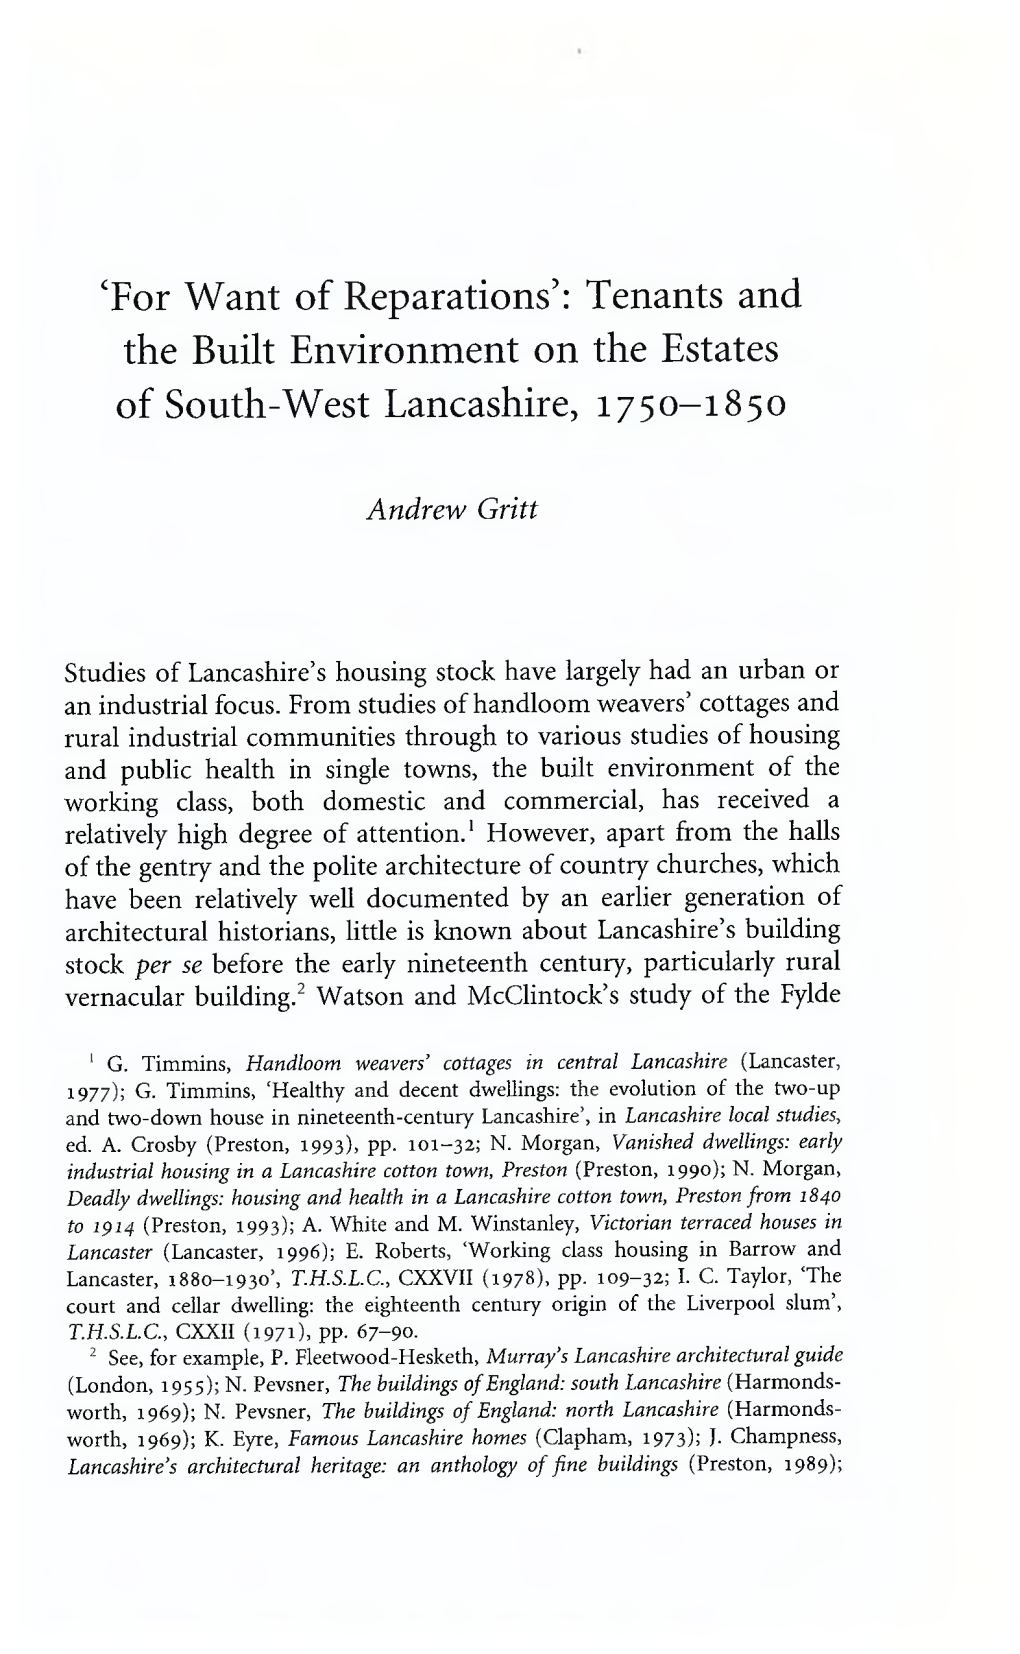 'For Want of Reparations': Tenants and the Built Environment on the Estates of South-West Lancashire, 1750-1850